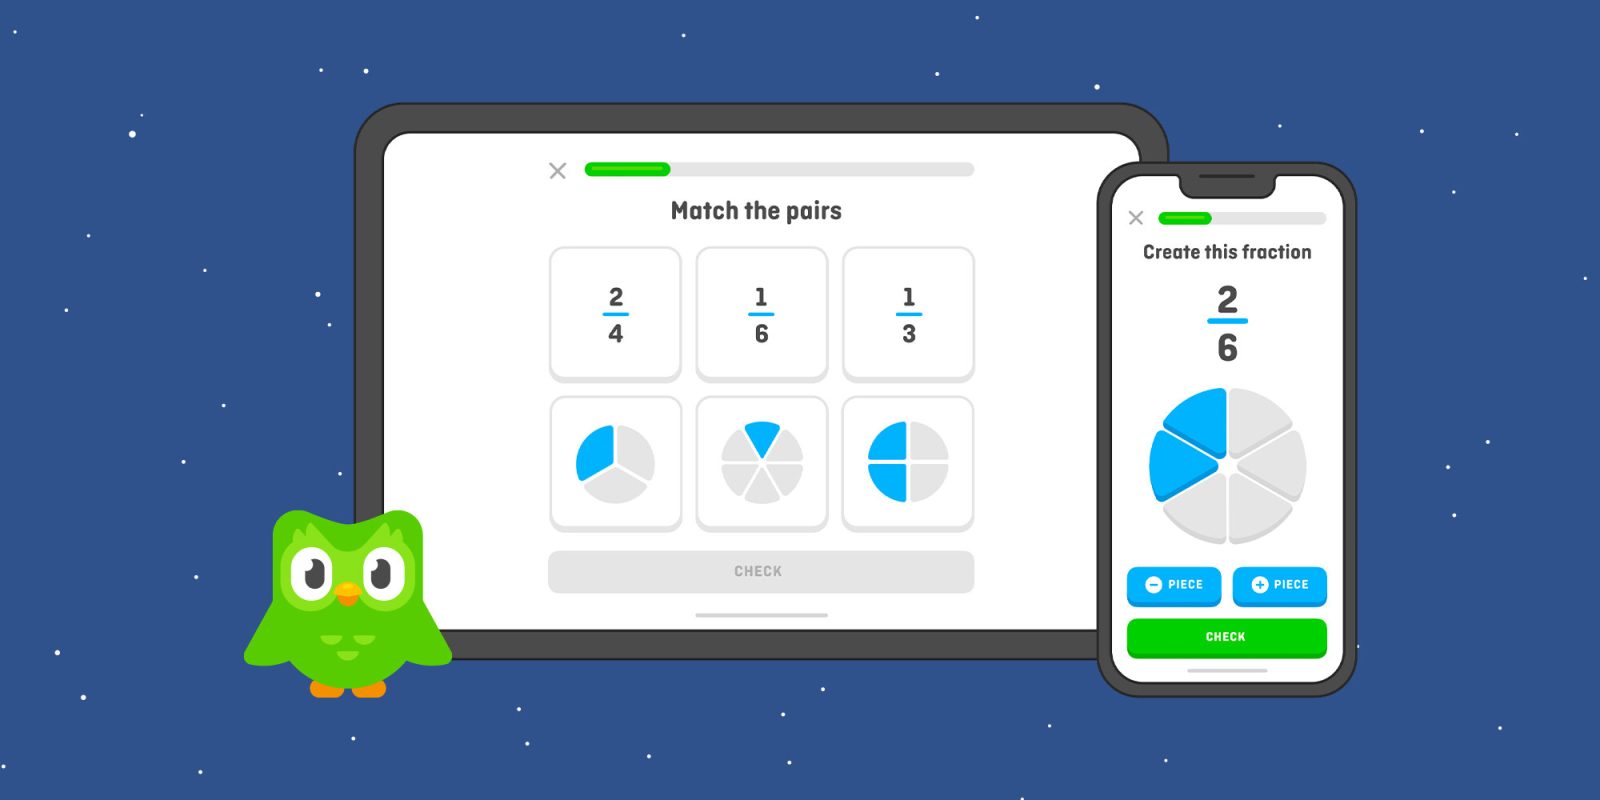 Duolingo announces new app 'Math' focused on kids, more features coming to other apps